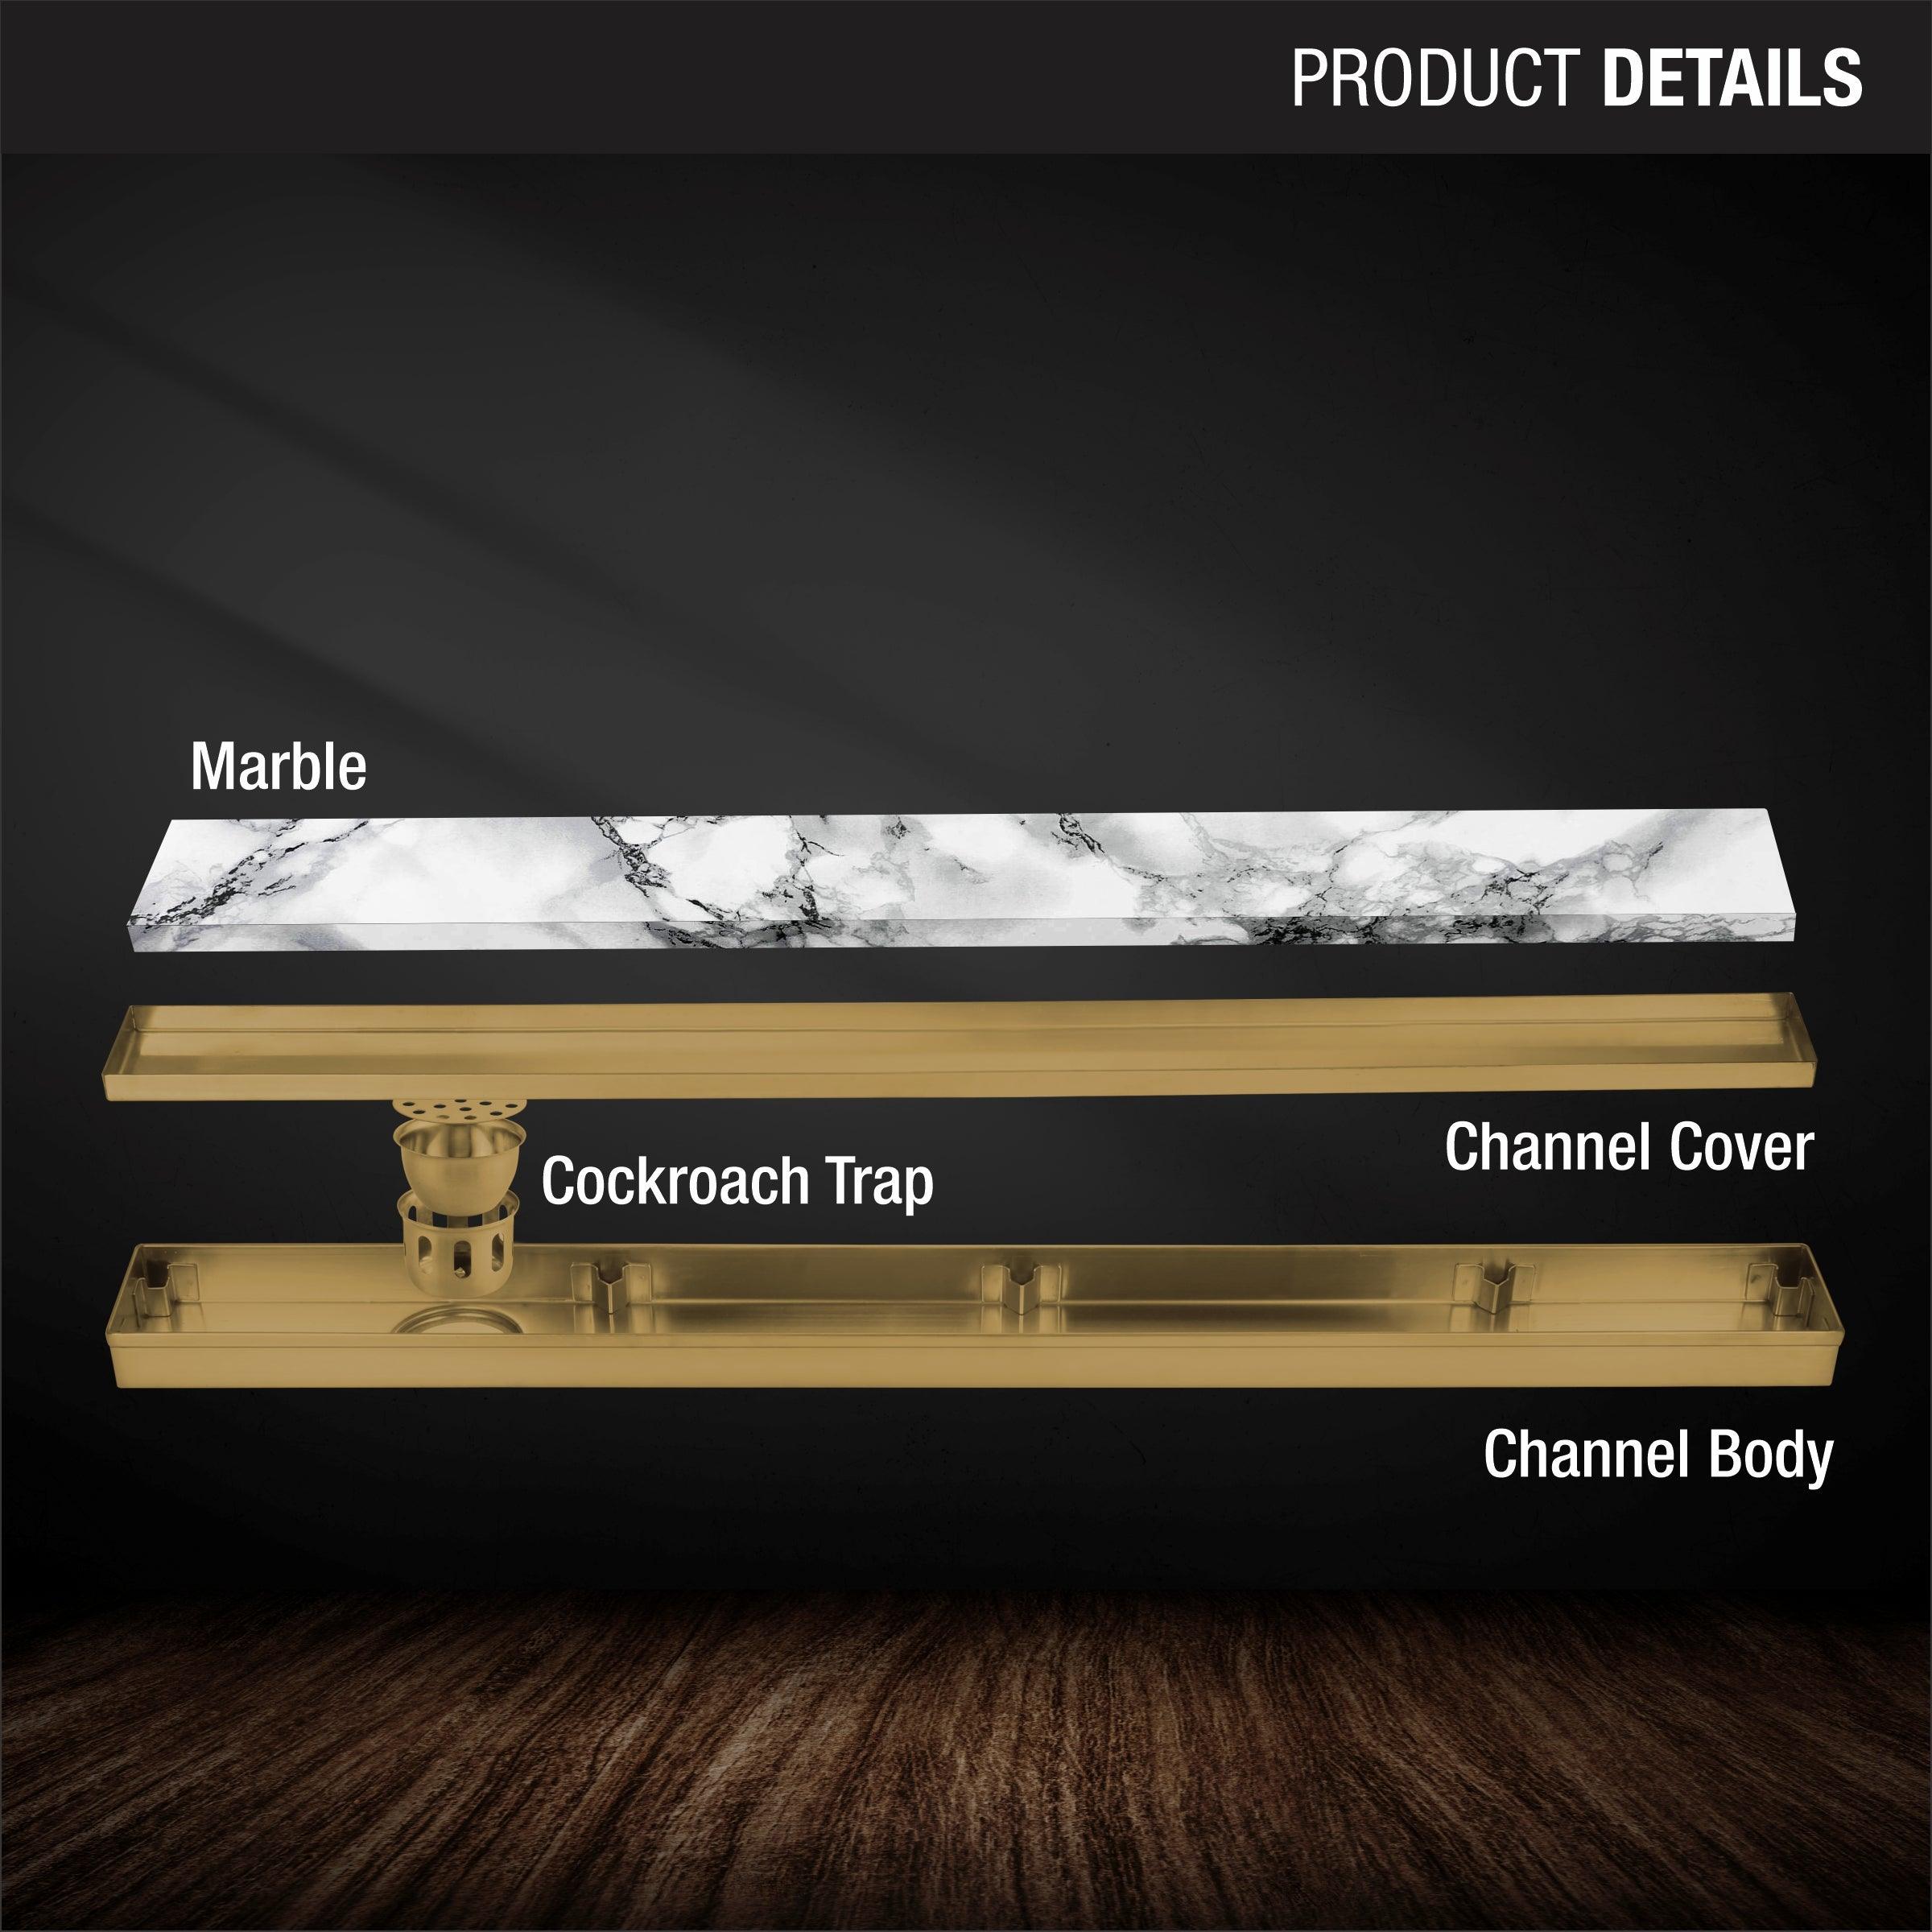 Marble Insert Shower Drain Channel - Yellow Gold (48 x 3 Inches) product details